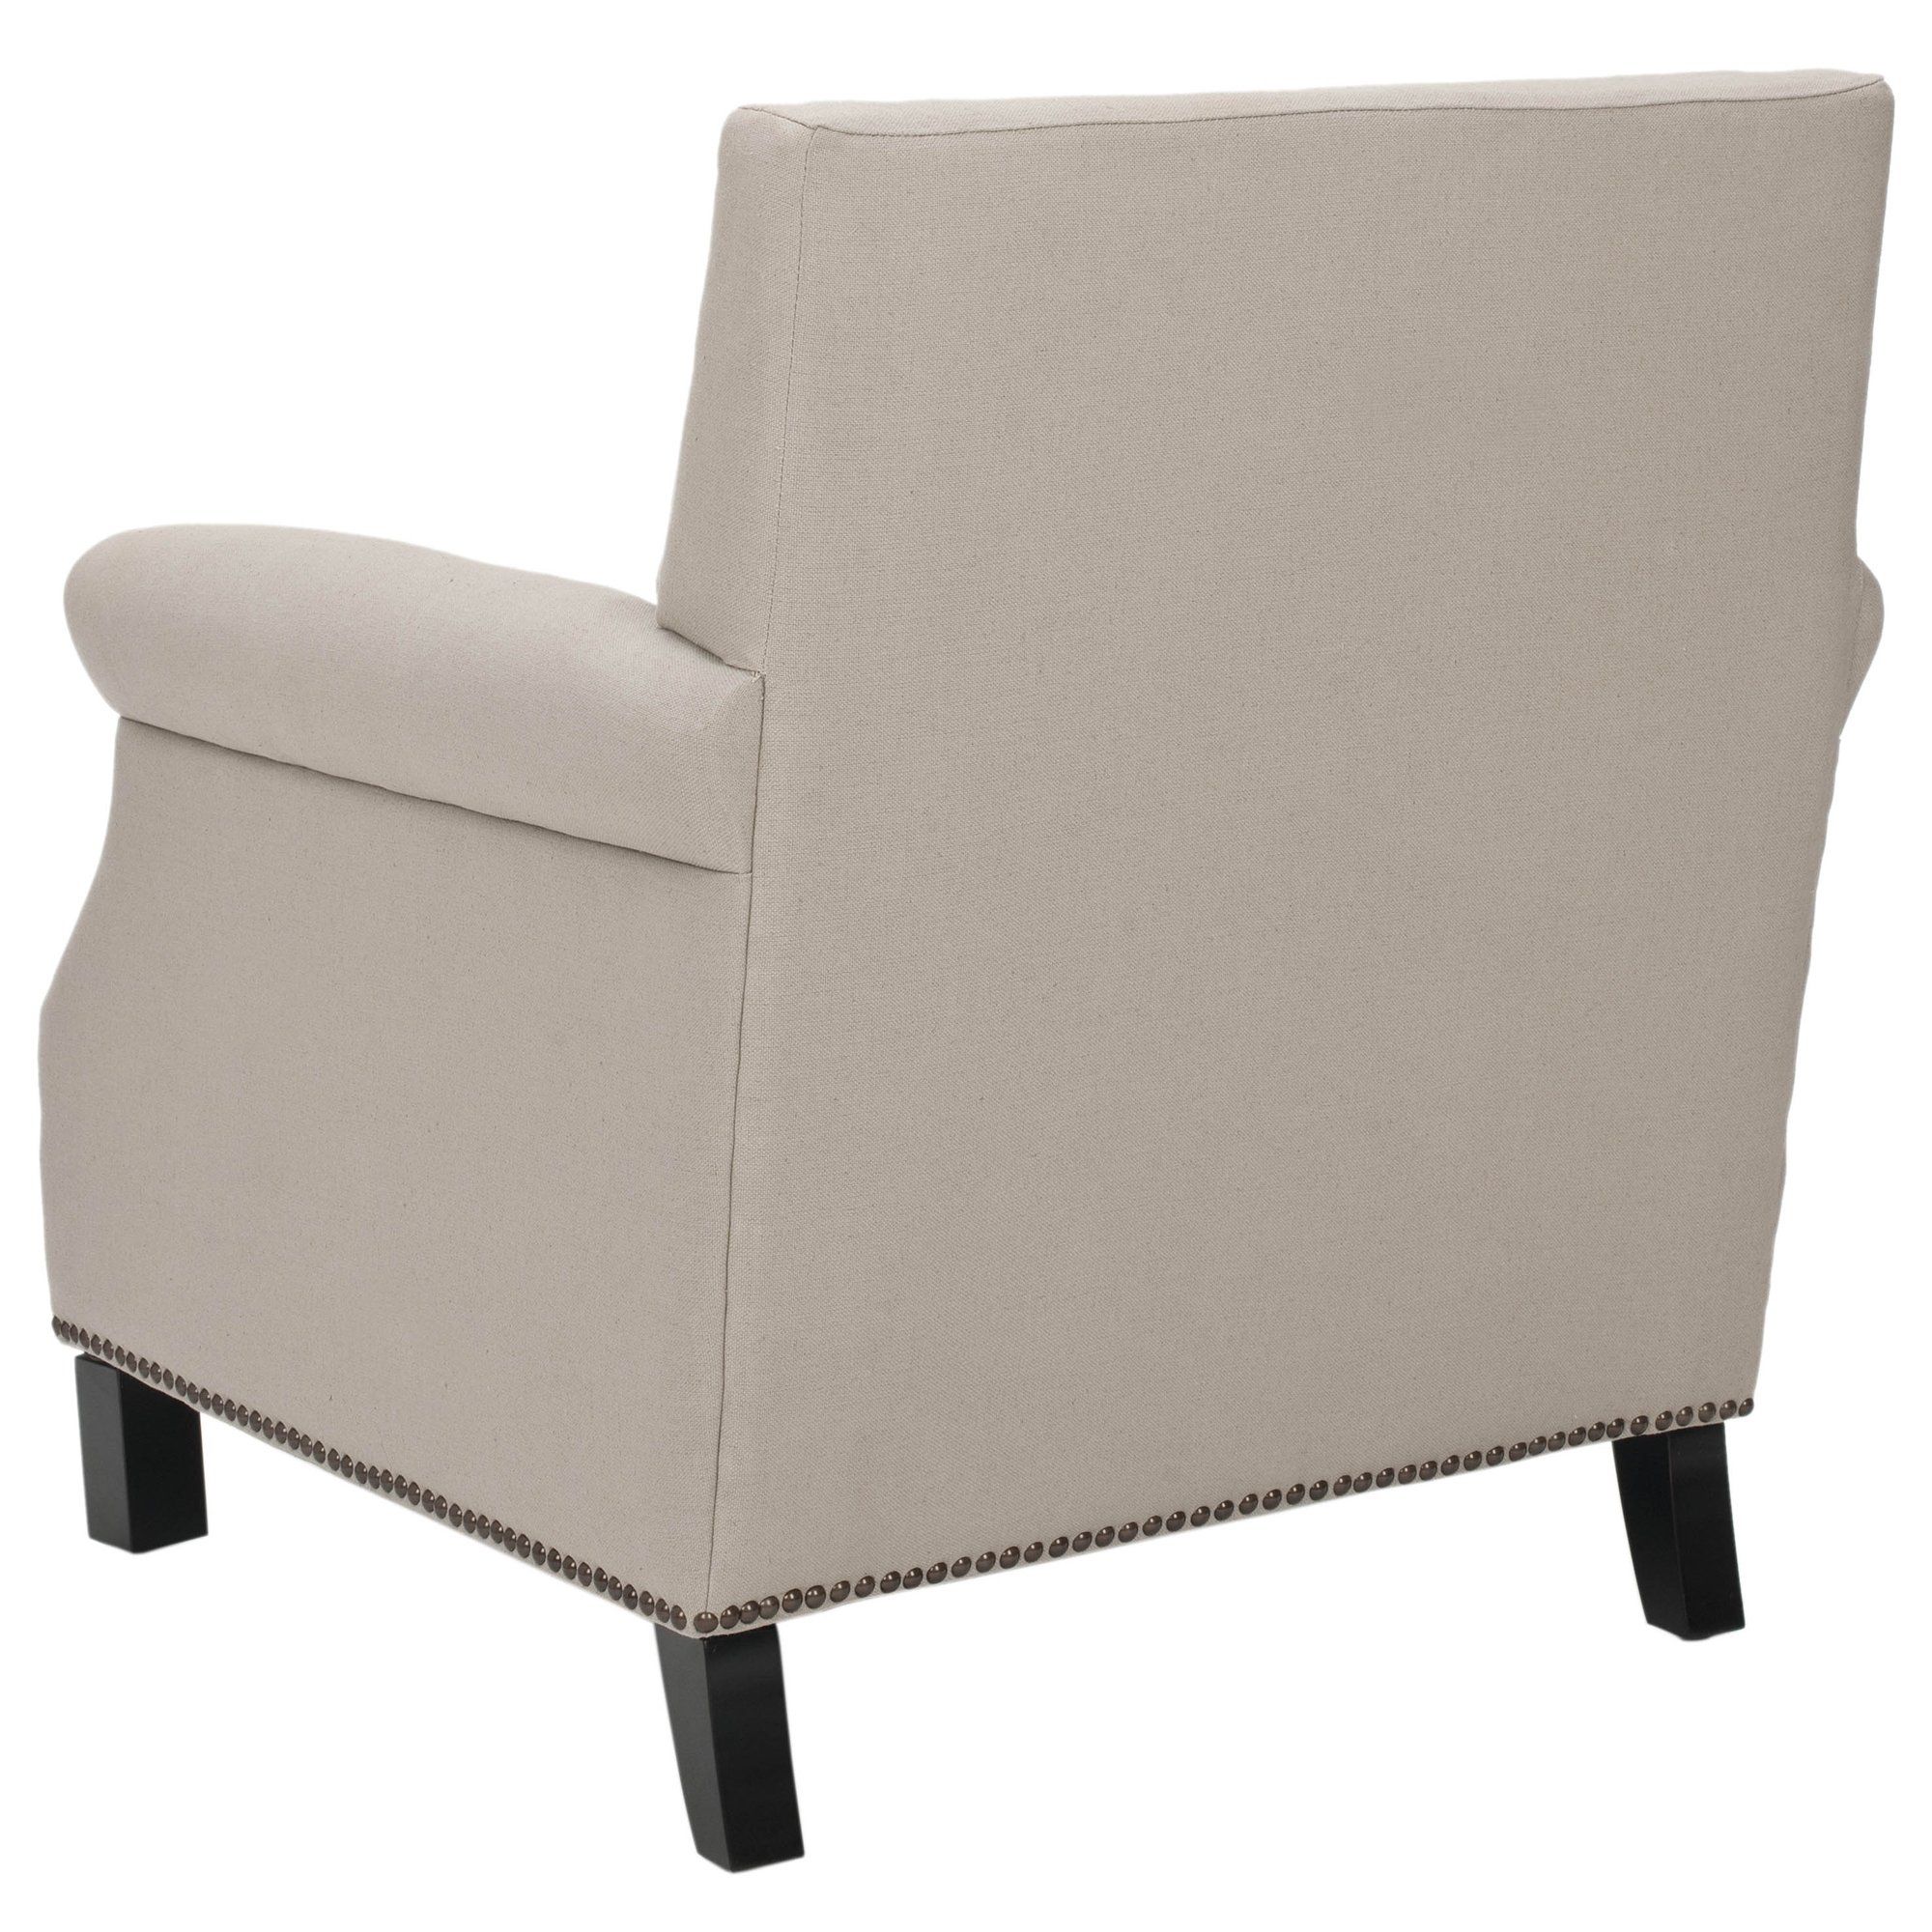 Shop Safavieh Mansfield Beige Club Chair – Free Shipping Today Within Mansfield Beige Linen Sofa Chairs (Photo 8 of 20)